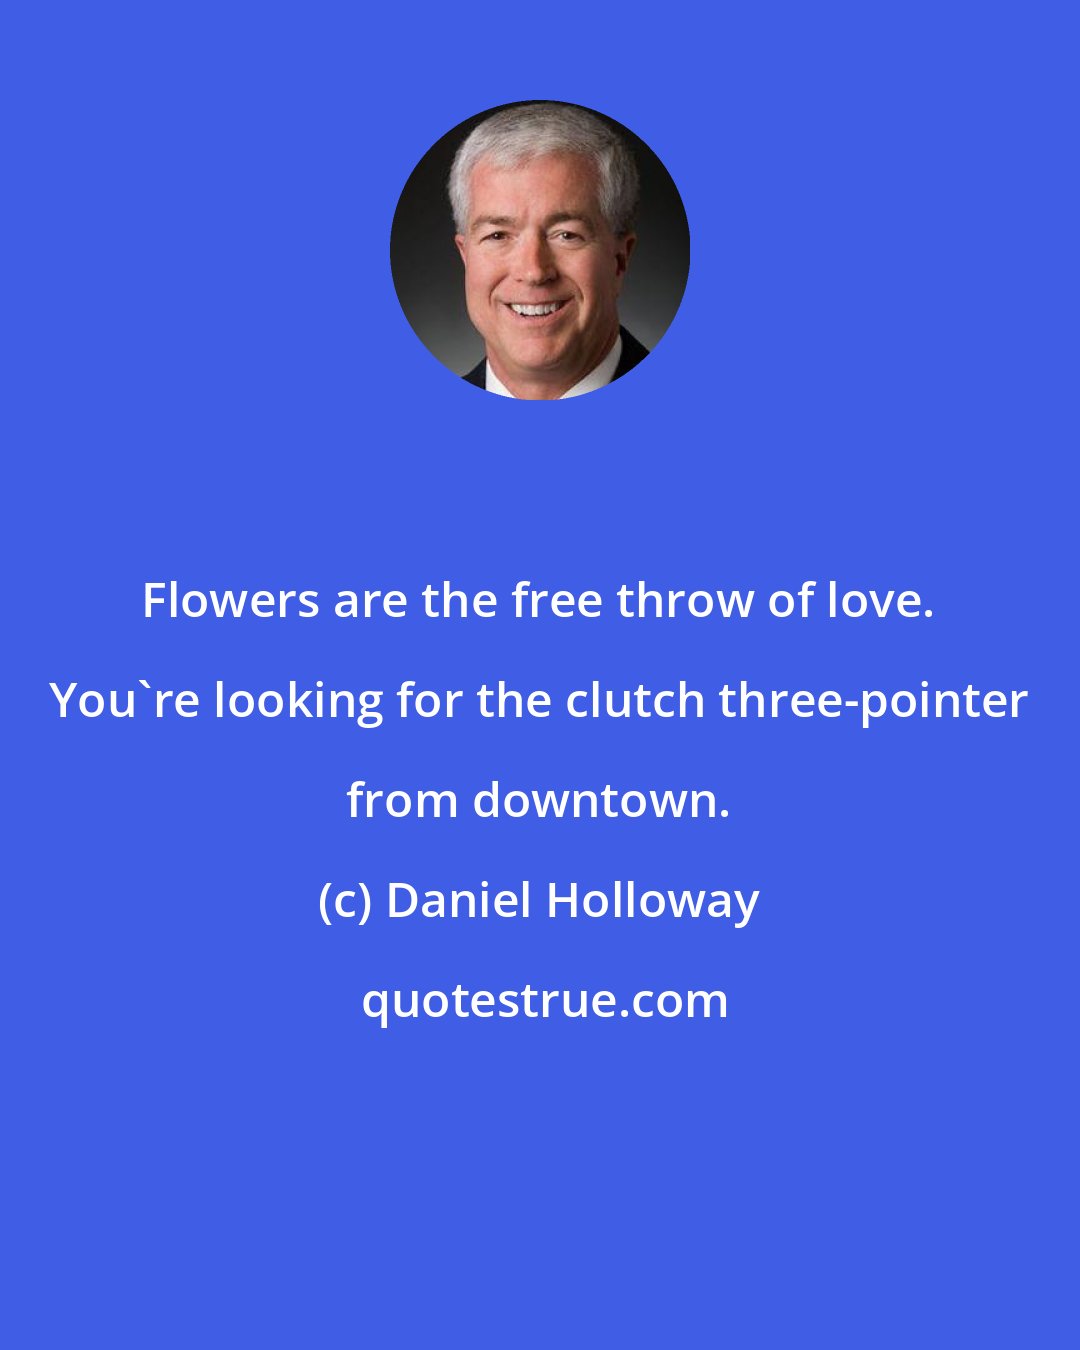 Daniel Holloway: Flowers are the free throw of love. You're looking for the clutch three-pointer from downtown.